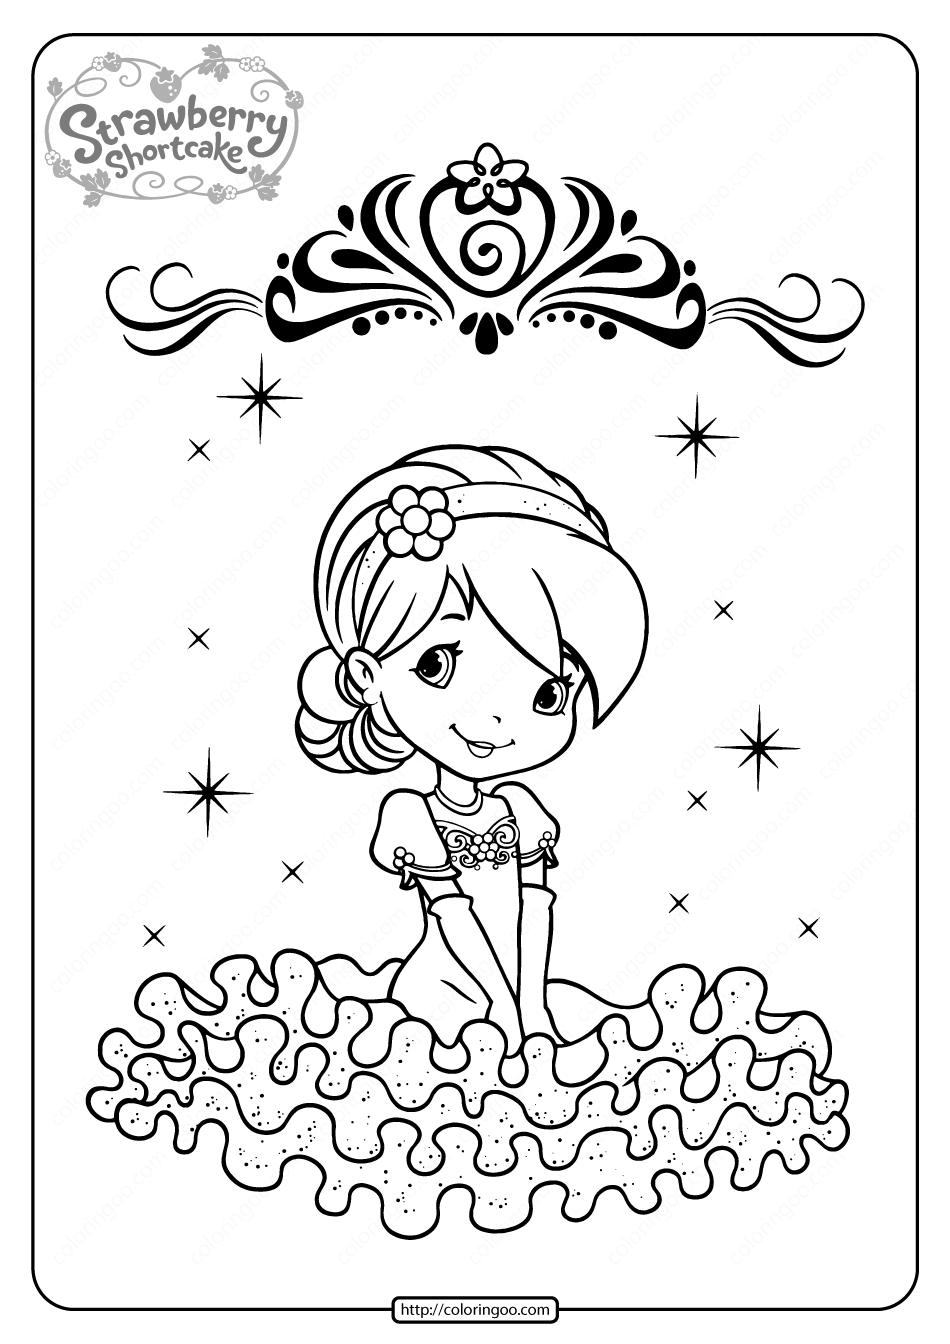 Free Printable Raspberry Torte Coloring Page